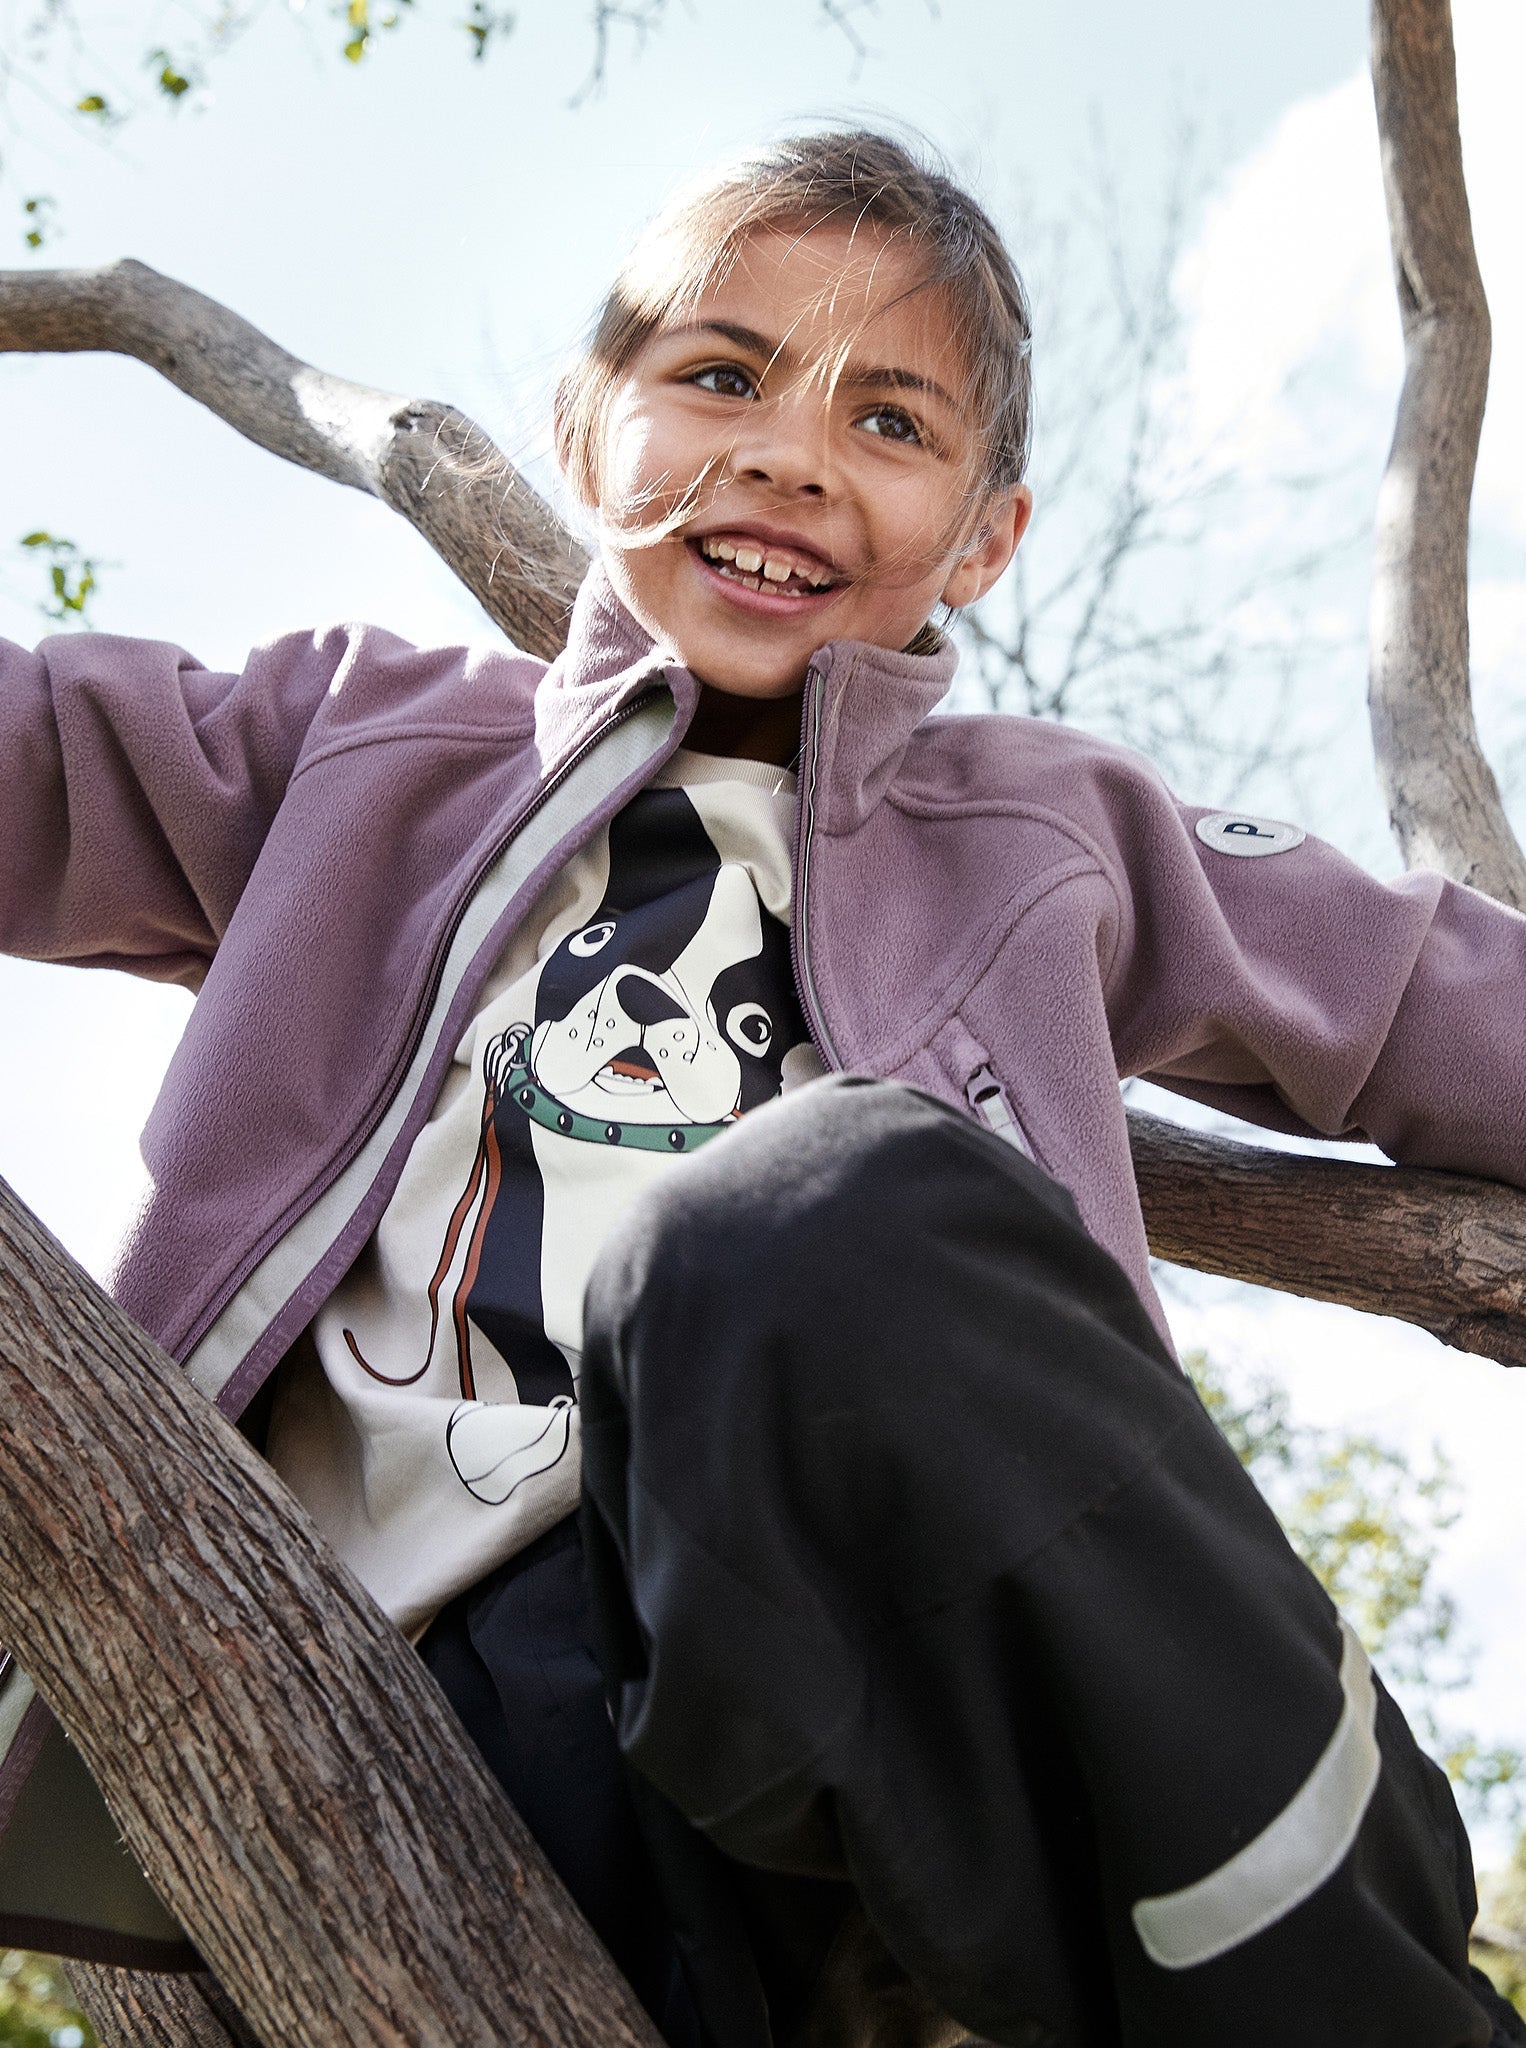 Waterproof Purple Kids Fleece Jacket from the Polarn O. Pyret kidswear collection. Ethically produced kids outerwear.